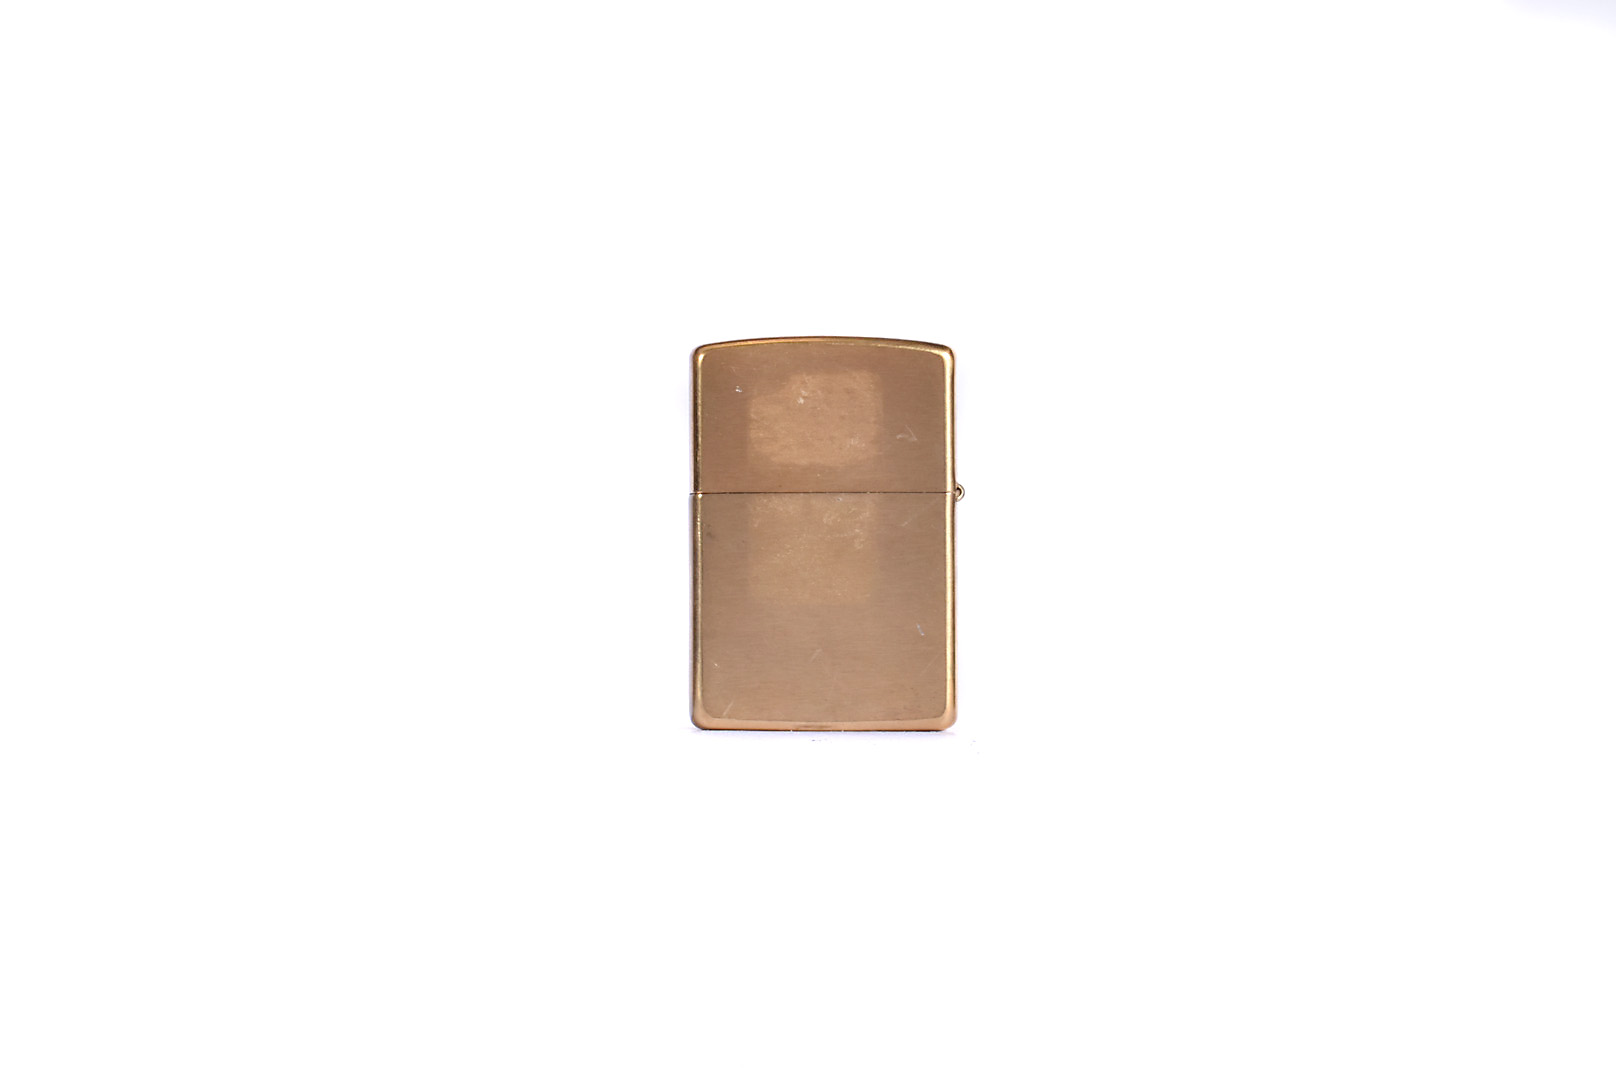 A Joe's Debut Zippo Lighter Prototype, on brushed brass case, dated 1997, unused (1) - Image 3 of 3